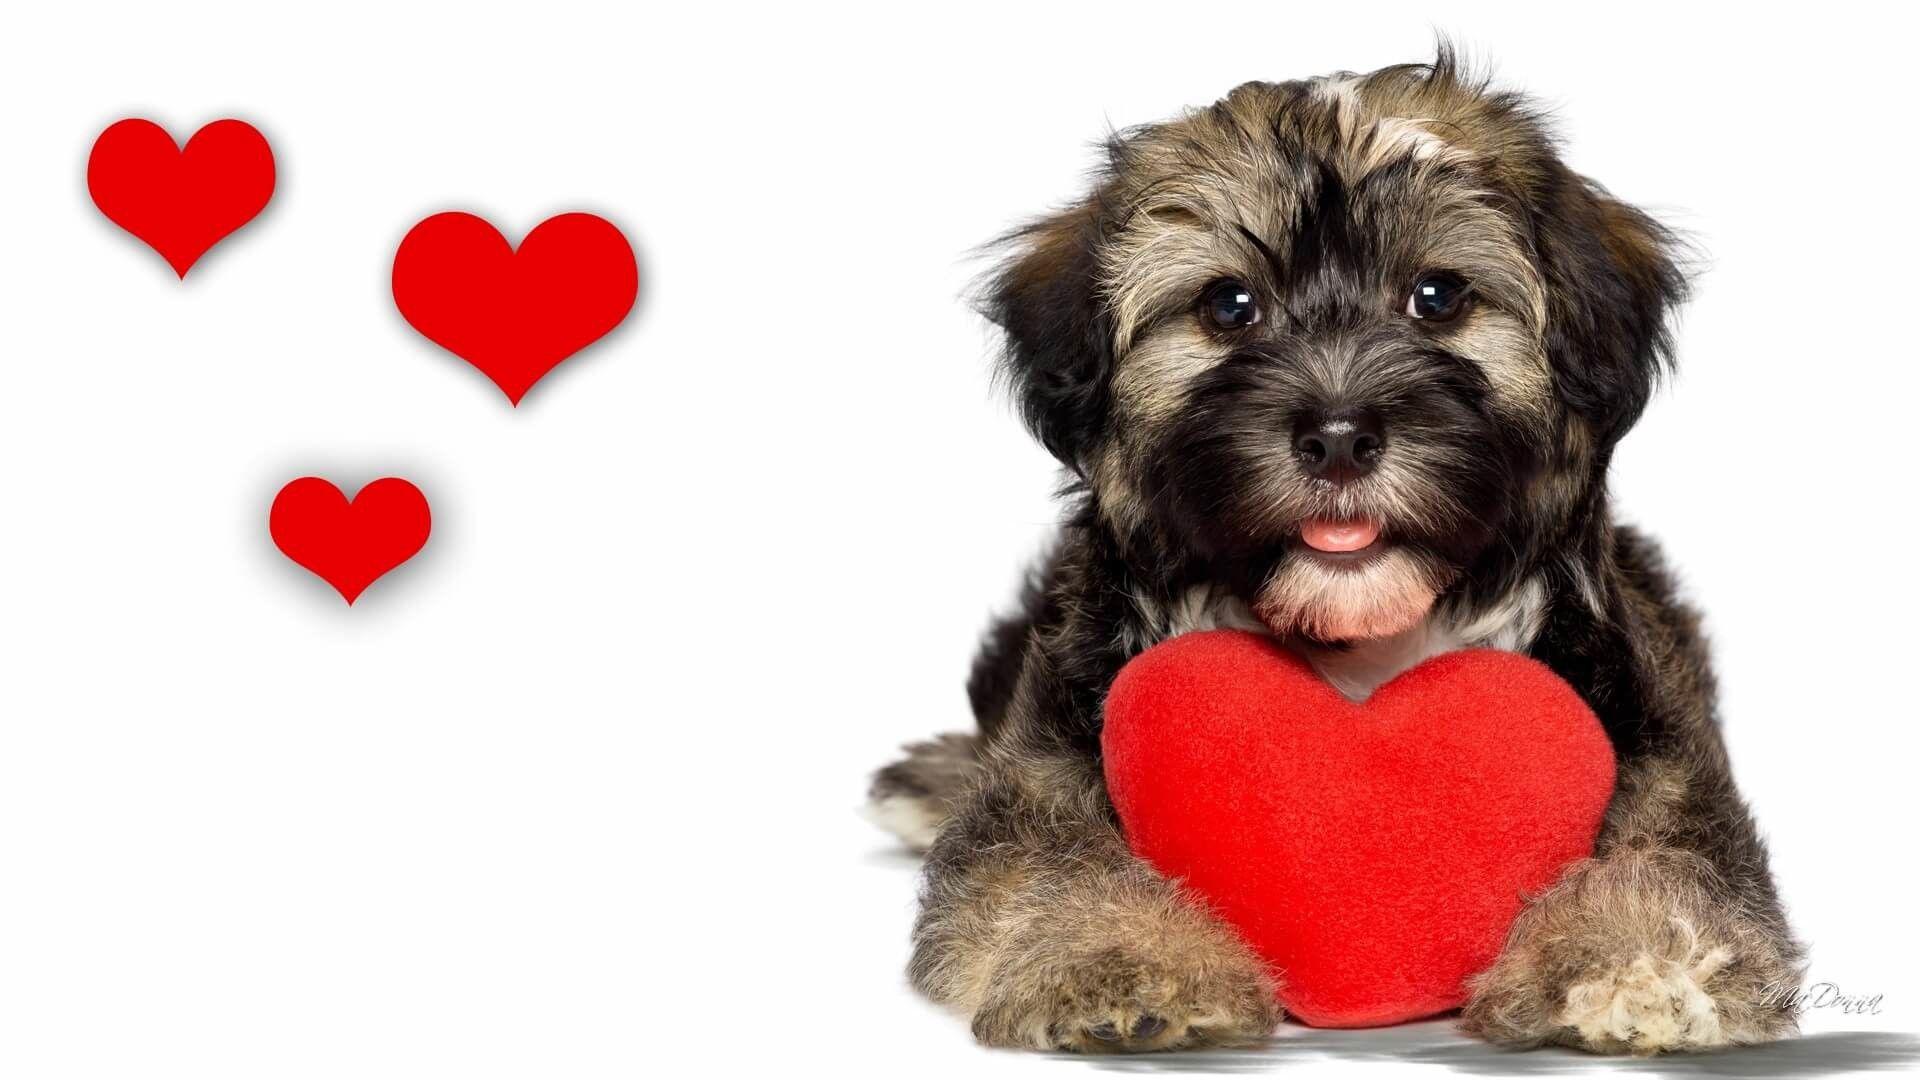 Puppy Valentine's Day Wallpapers - Wallpaper Cave